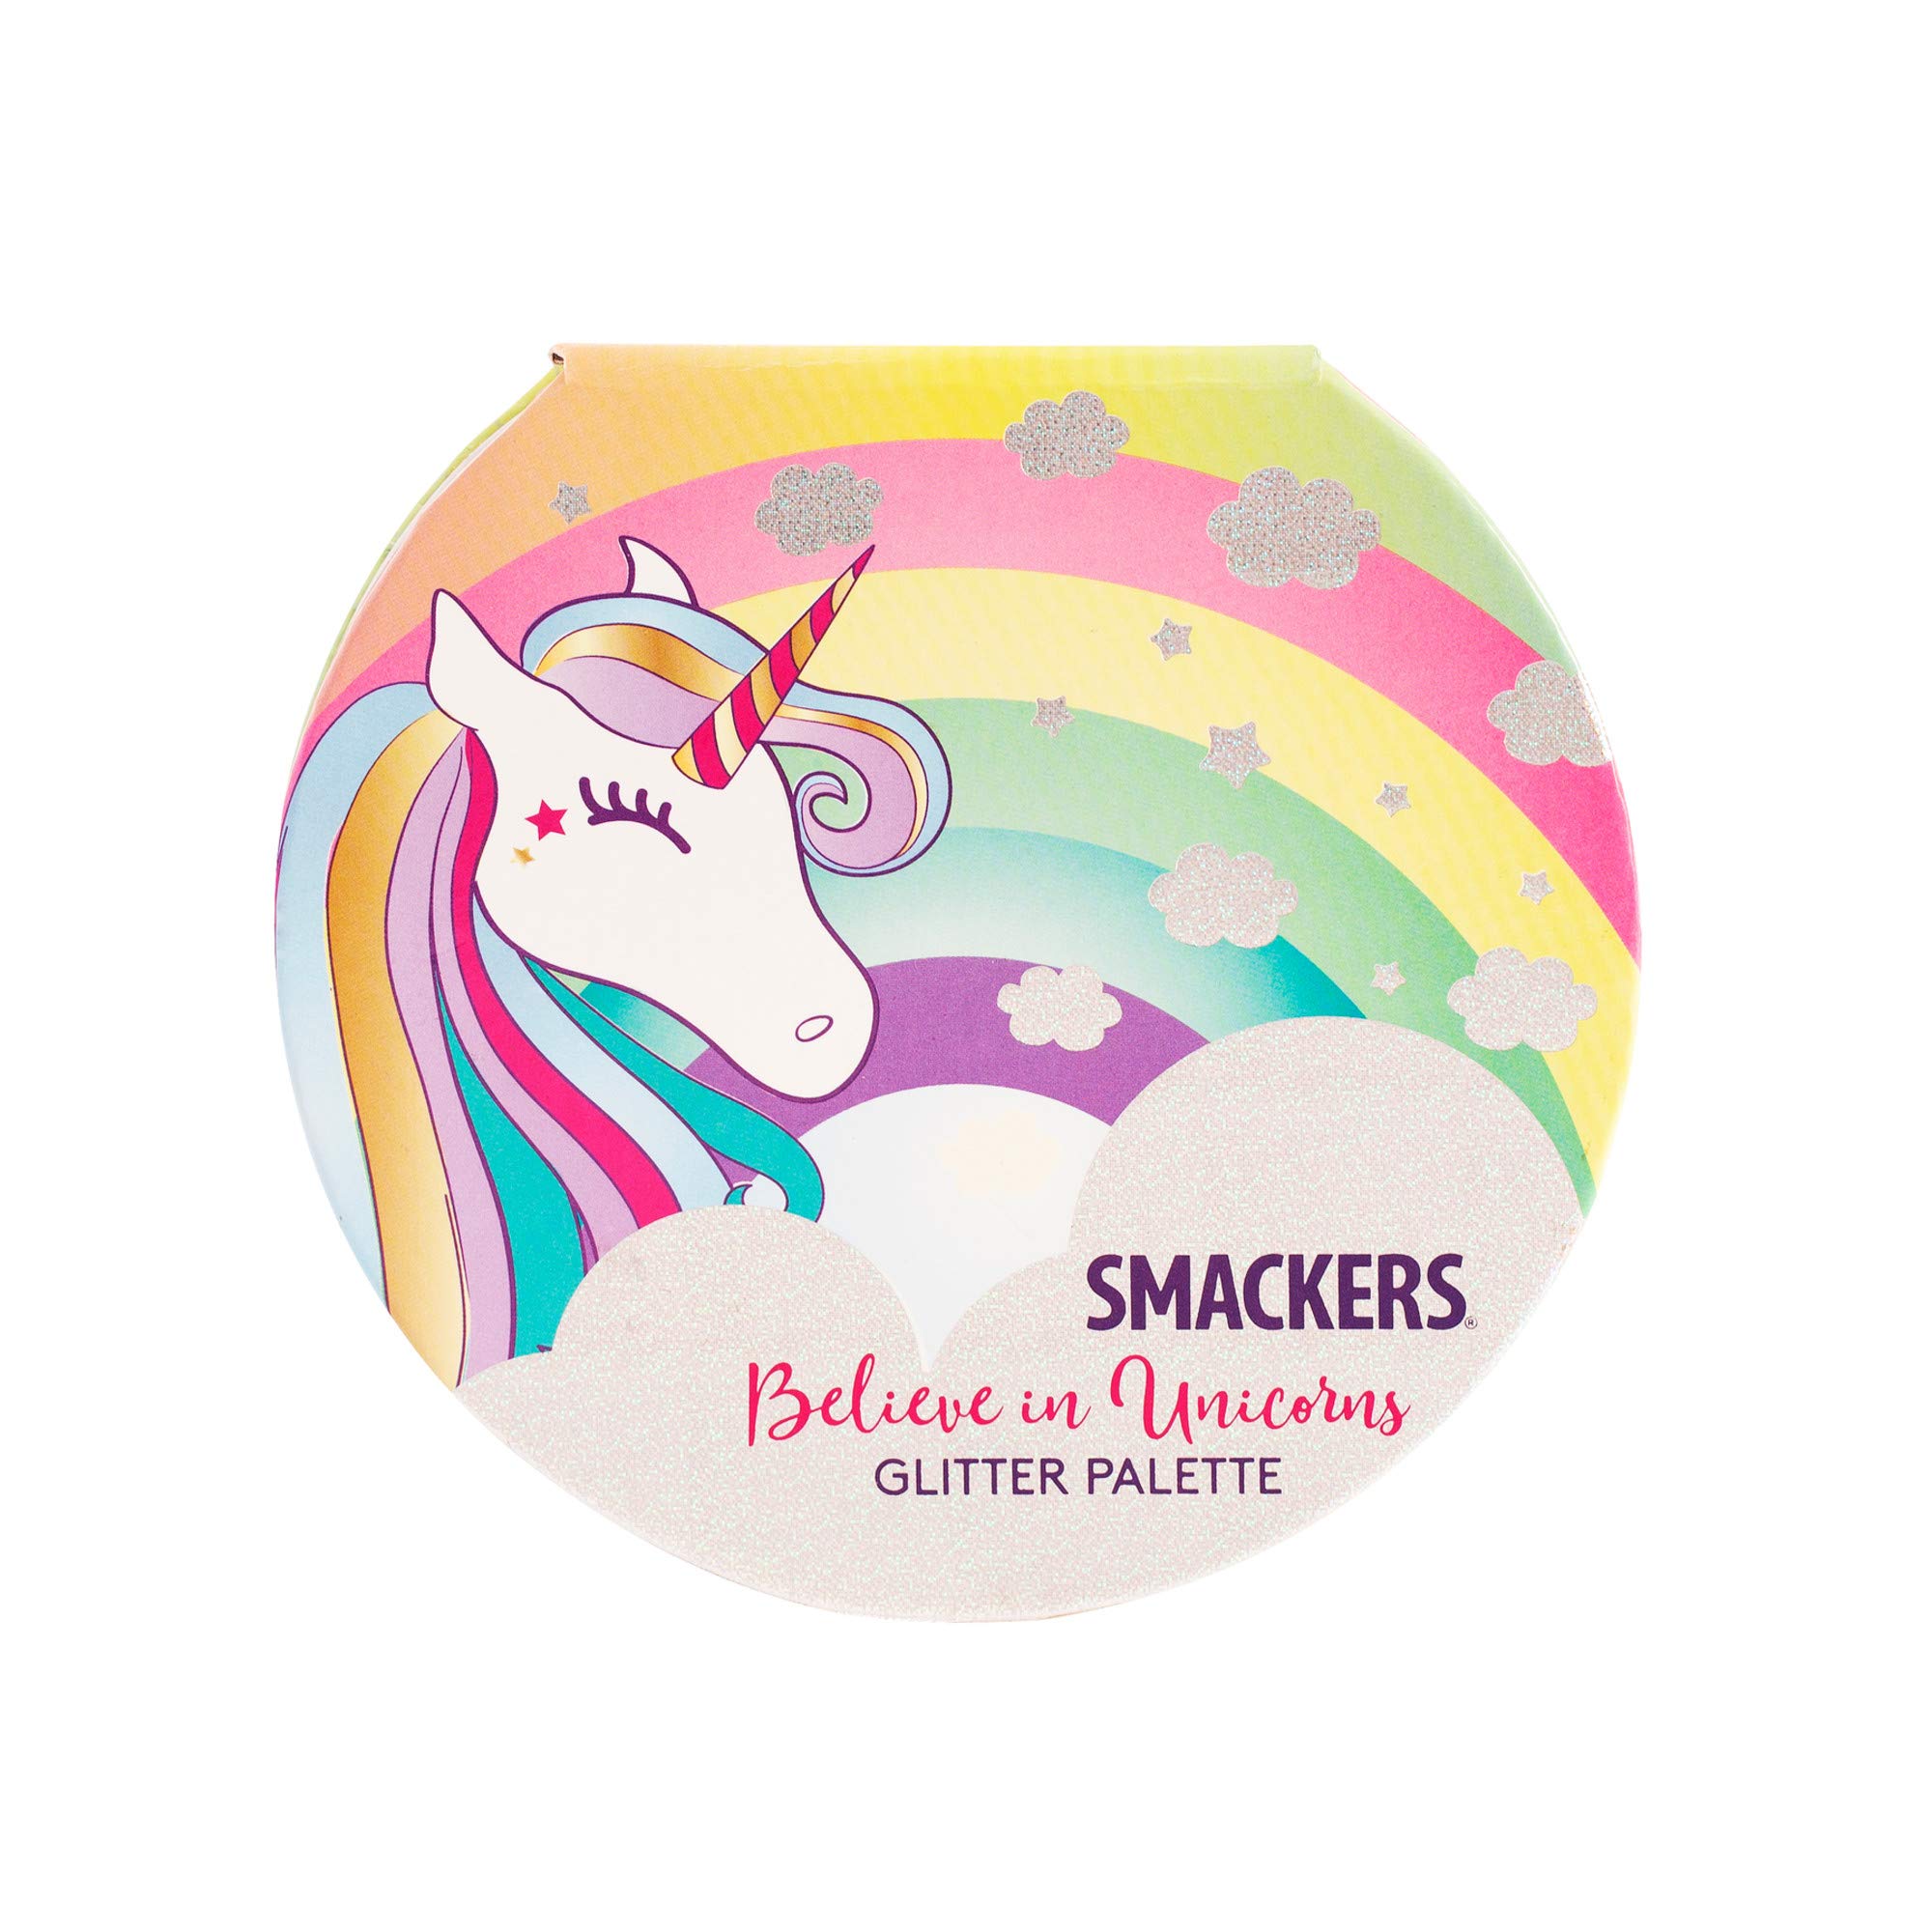 Lip Smacker Sparkle & Shine Eyeshadow Makeup Palette, Unicorn Palette | Christmas Make Up Collection | Holiday Present | Gift for Girls